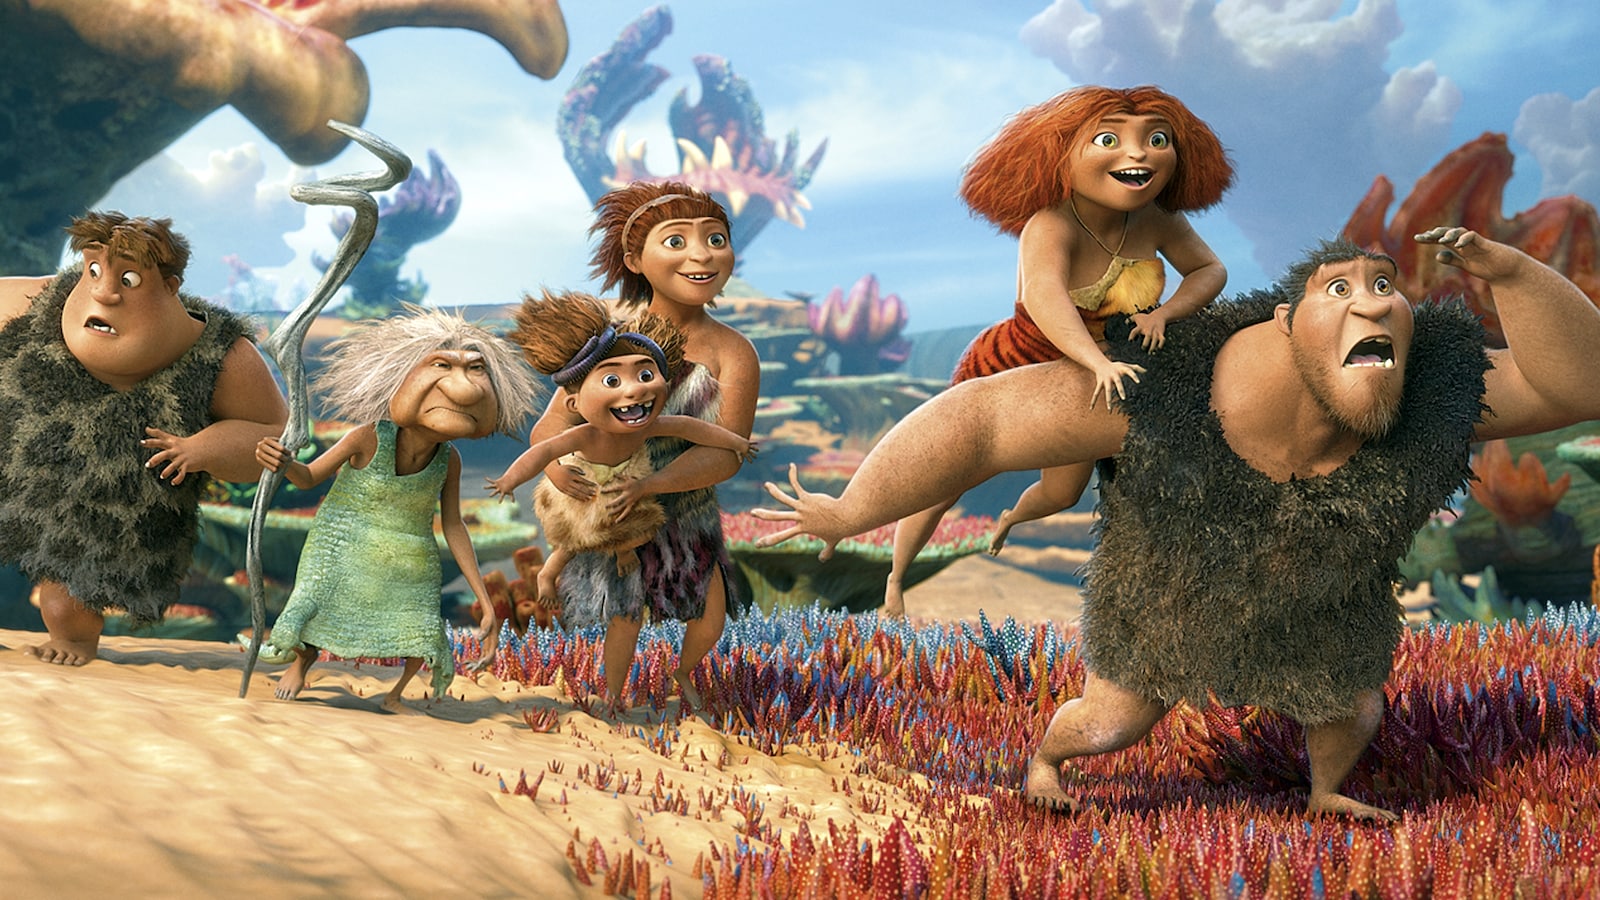 the-croods-2013